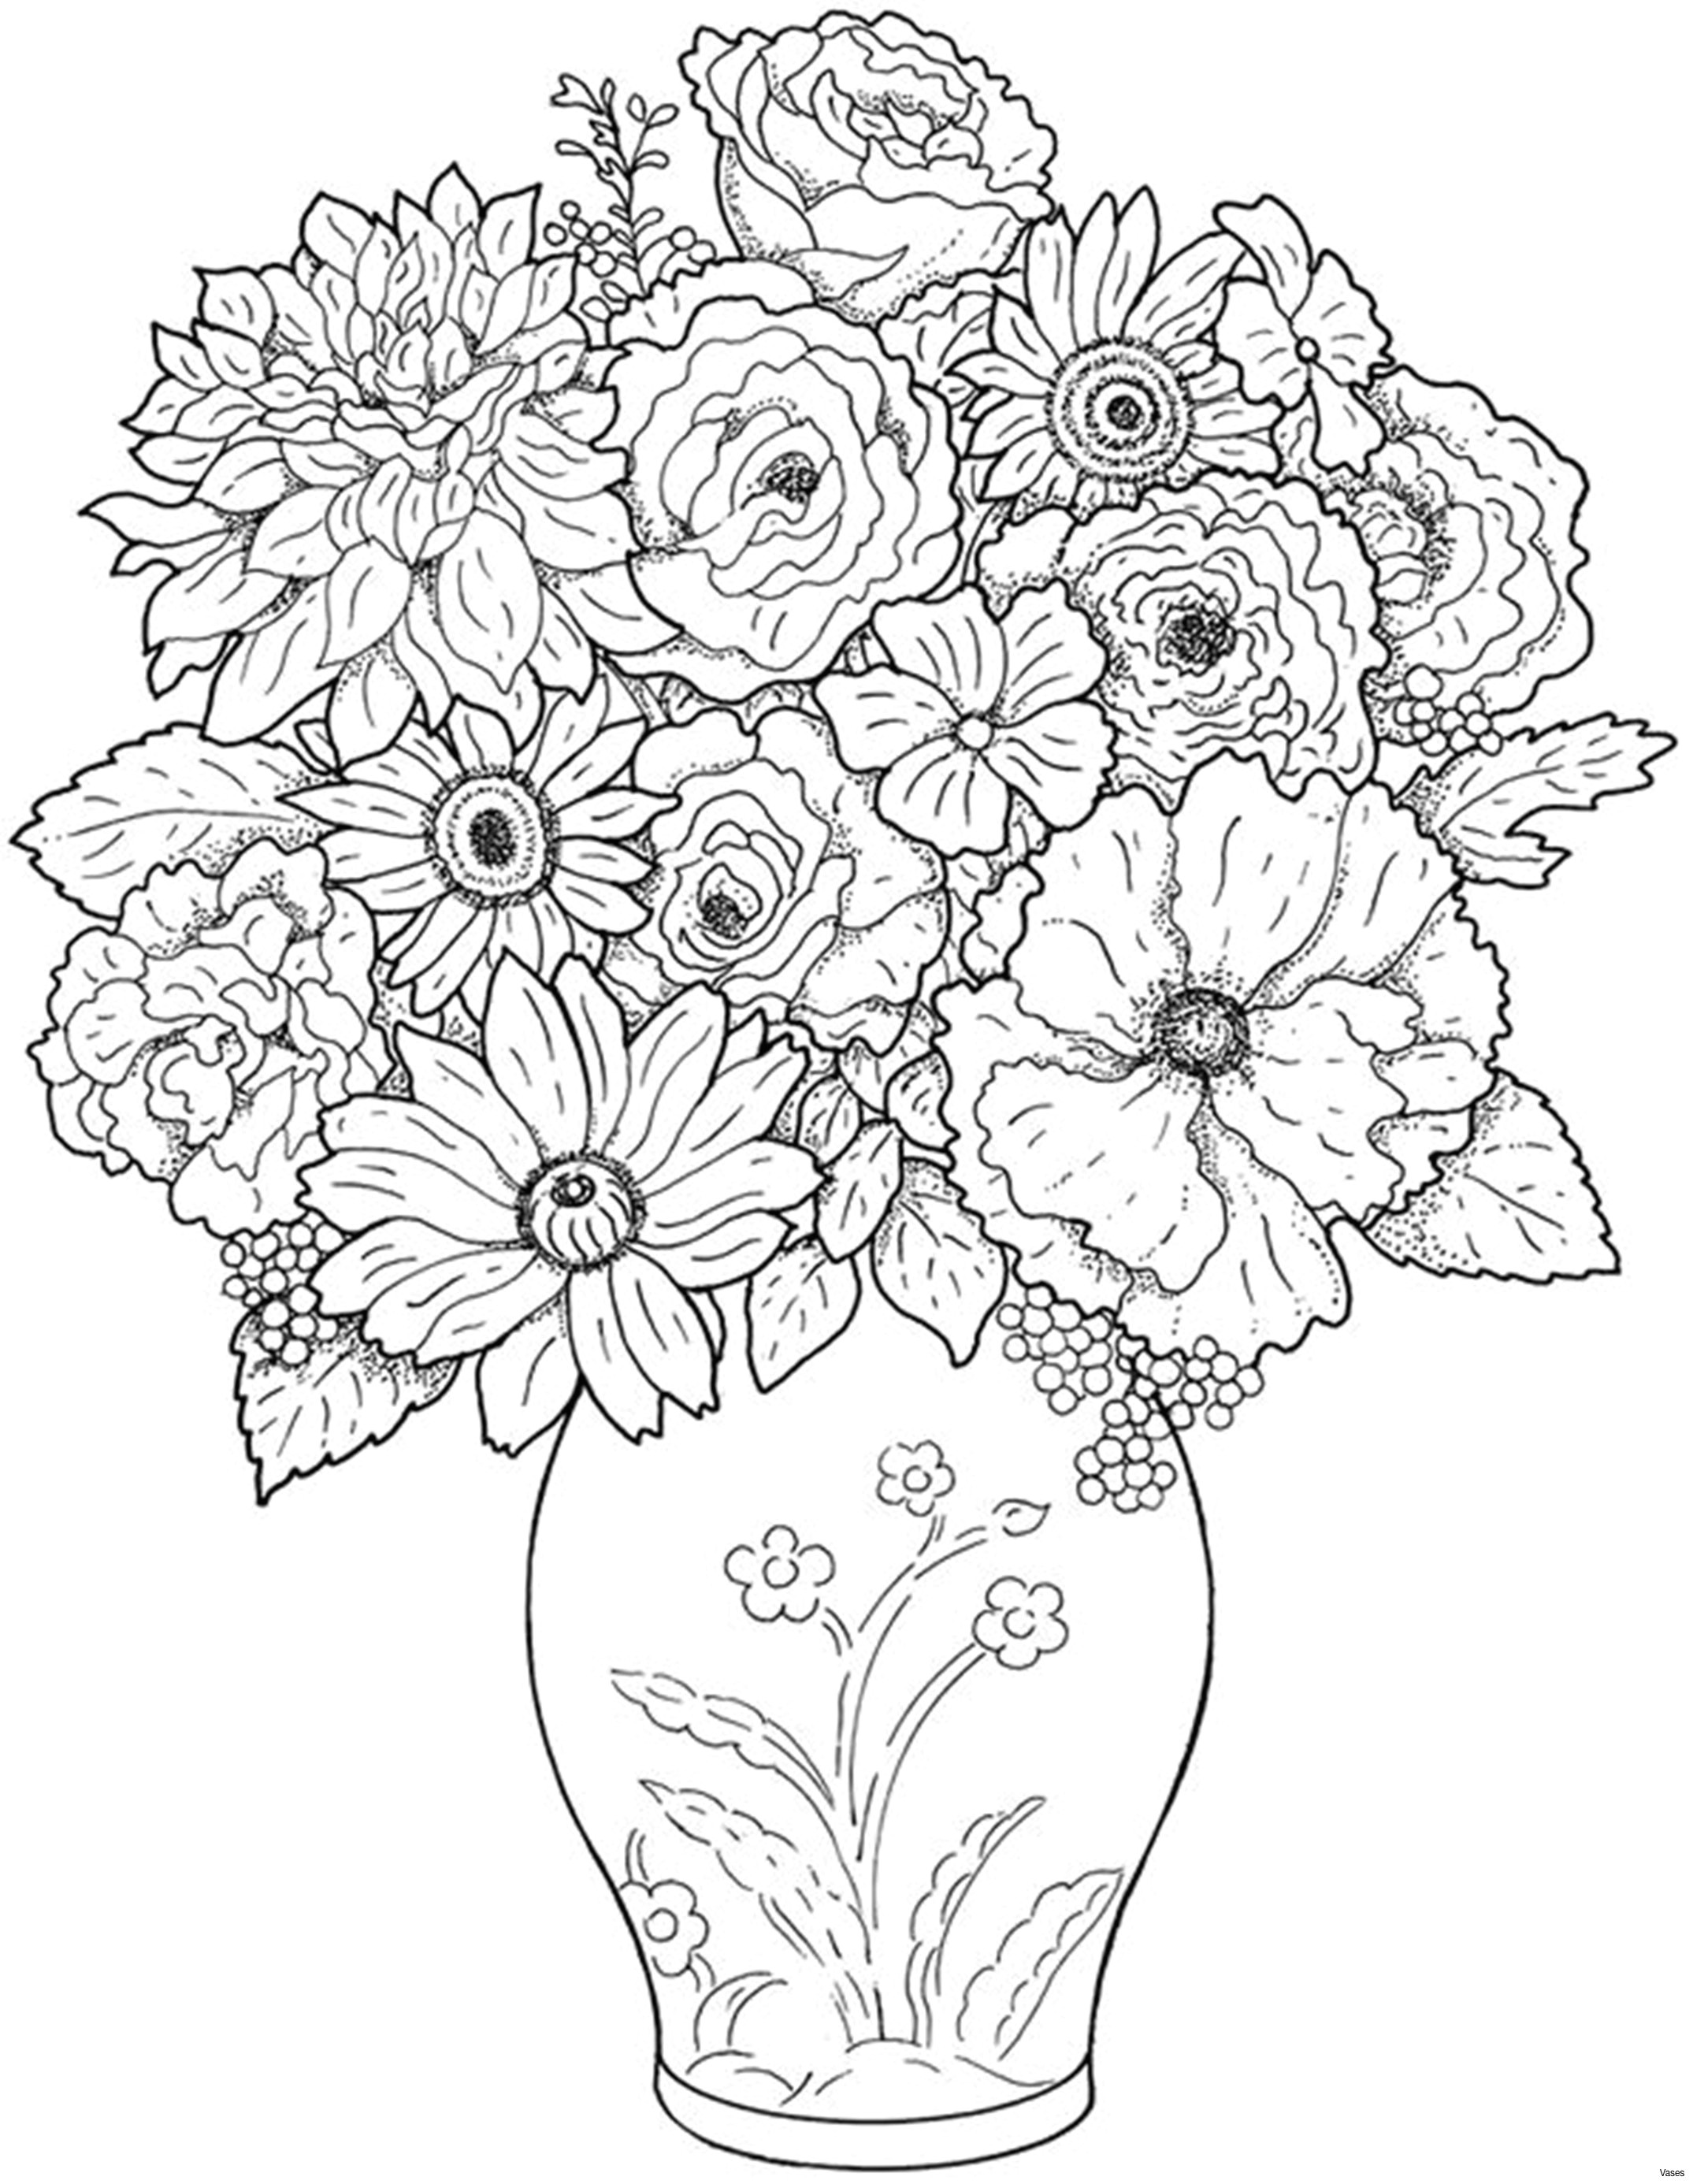 Drawing Of Flower Vase with Design Www Colouring Pages Aua Ergewohnliche Cool Vases Flower Vase Coloring